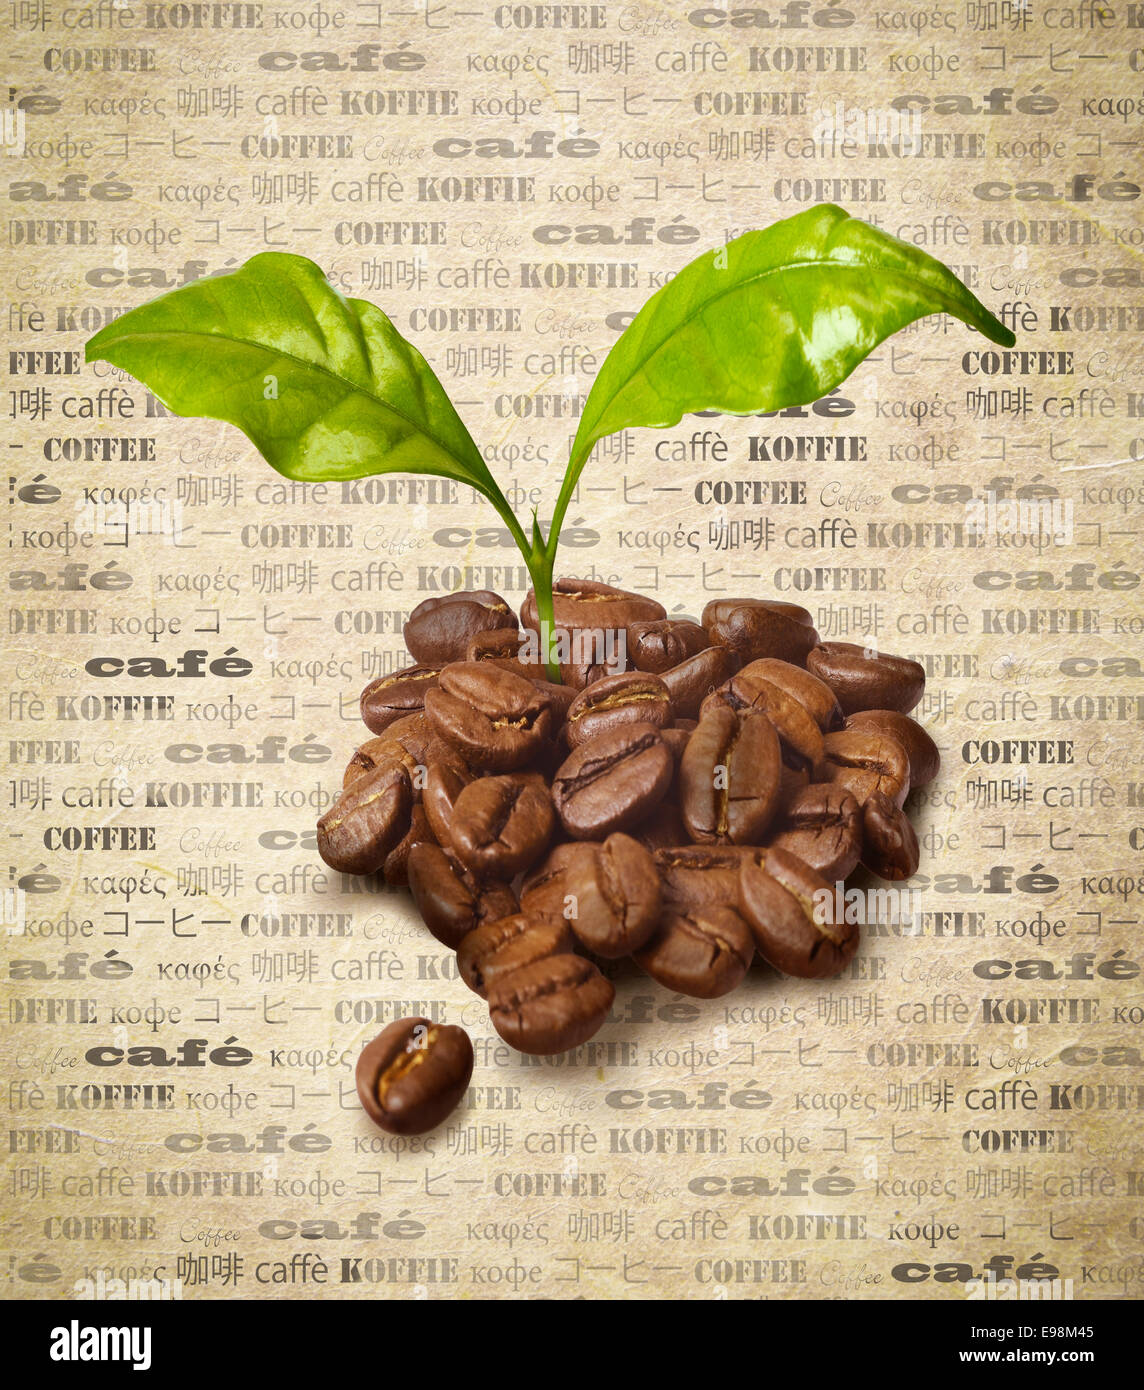 Coffee beans with fresh growing green leaves on a backround of aged paper with the word coffee repeated multiple times in different languages Stock Photo